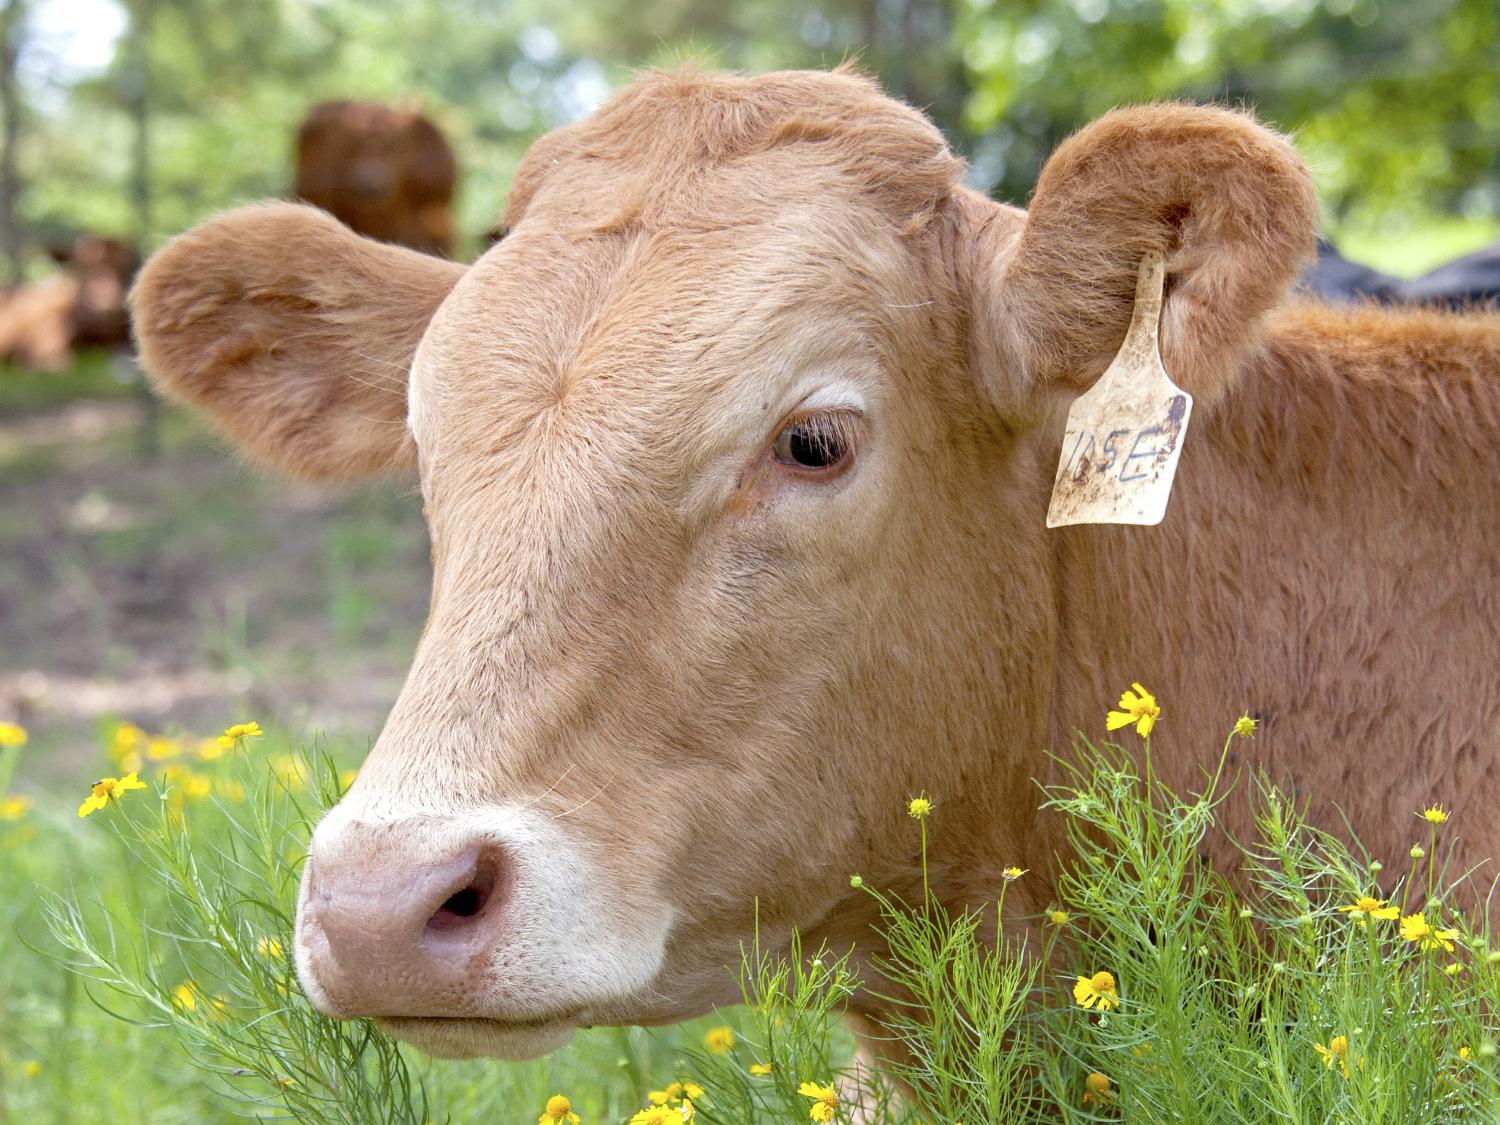 Mississippi cattle, such as this one on the Beaverdam Fresh Farms in Clay County, Mississippi, on July 8, 2014, eat less and grow slower during the hottest months. While Mississippi has not faced extremely dry conditions in recent years, the state's herd numbers are still down, just like those in drought-stricken regions. (Photo by MSU Ag Communications/Kat Lawrence)